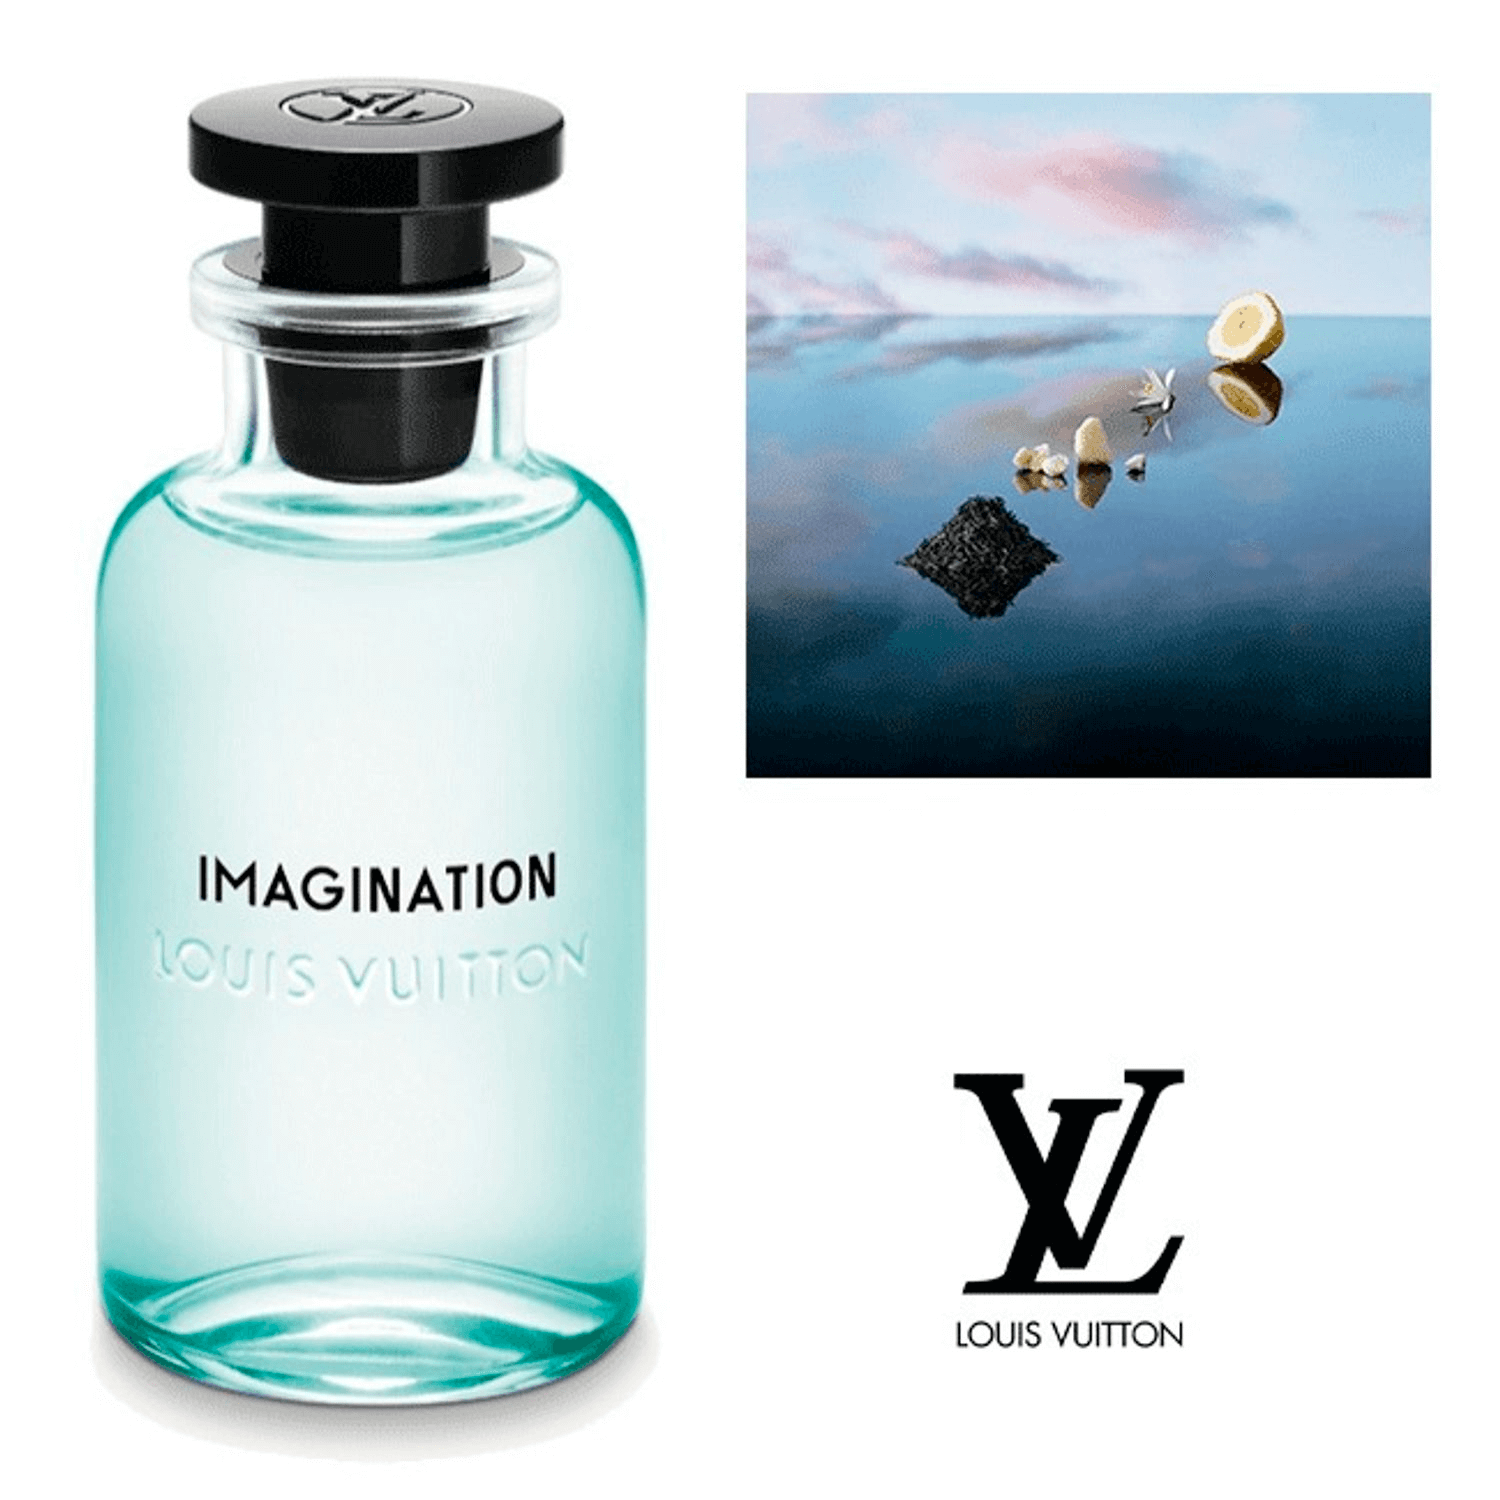 Imagination by Louis Vuitton  Reviews  Perfume Facts